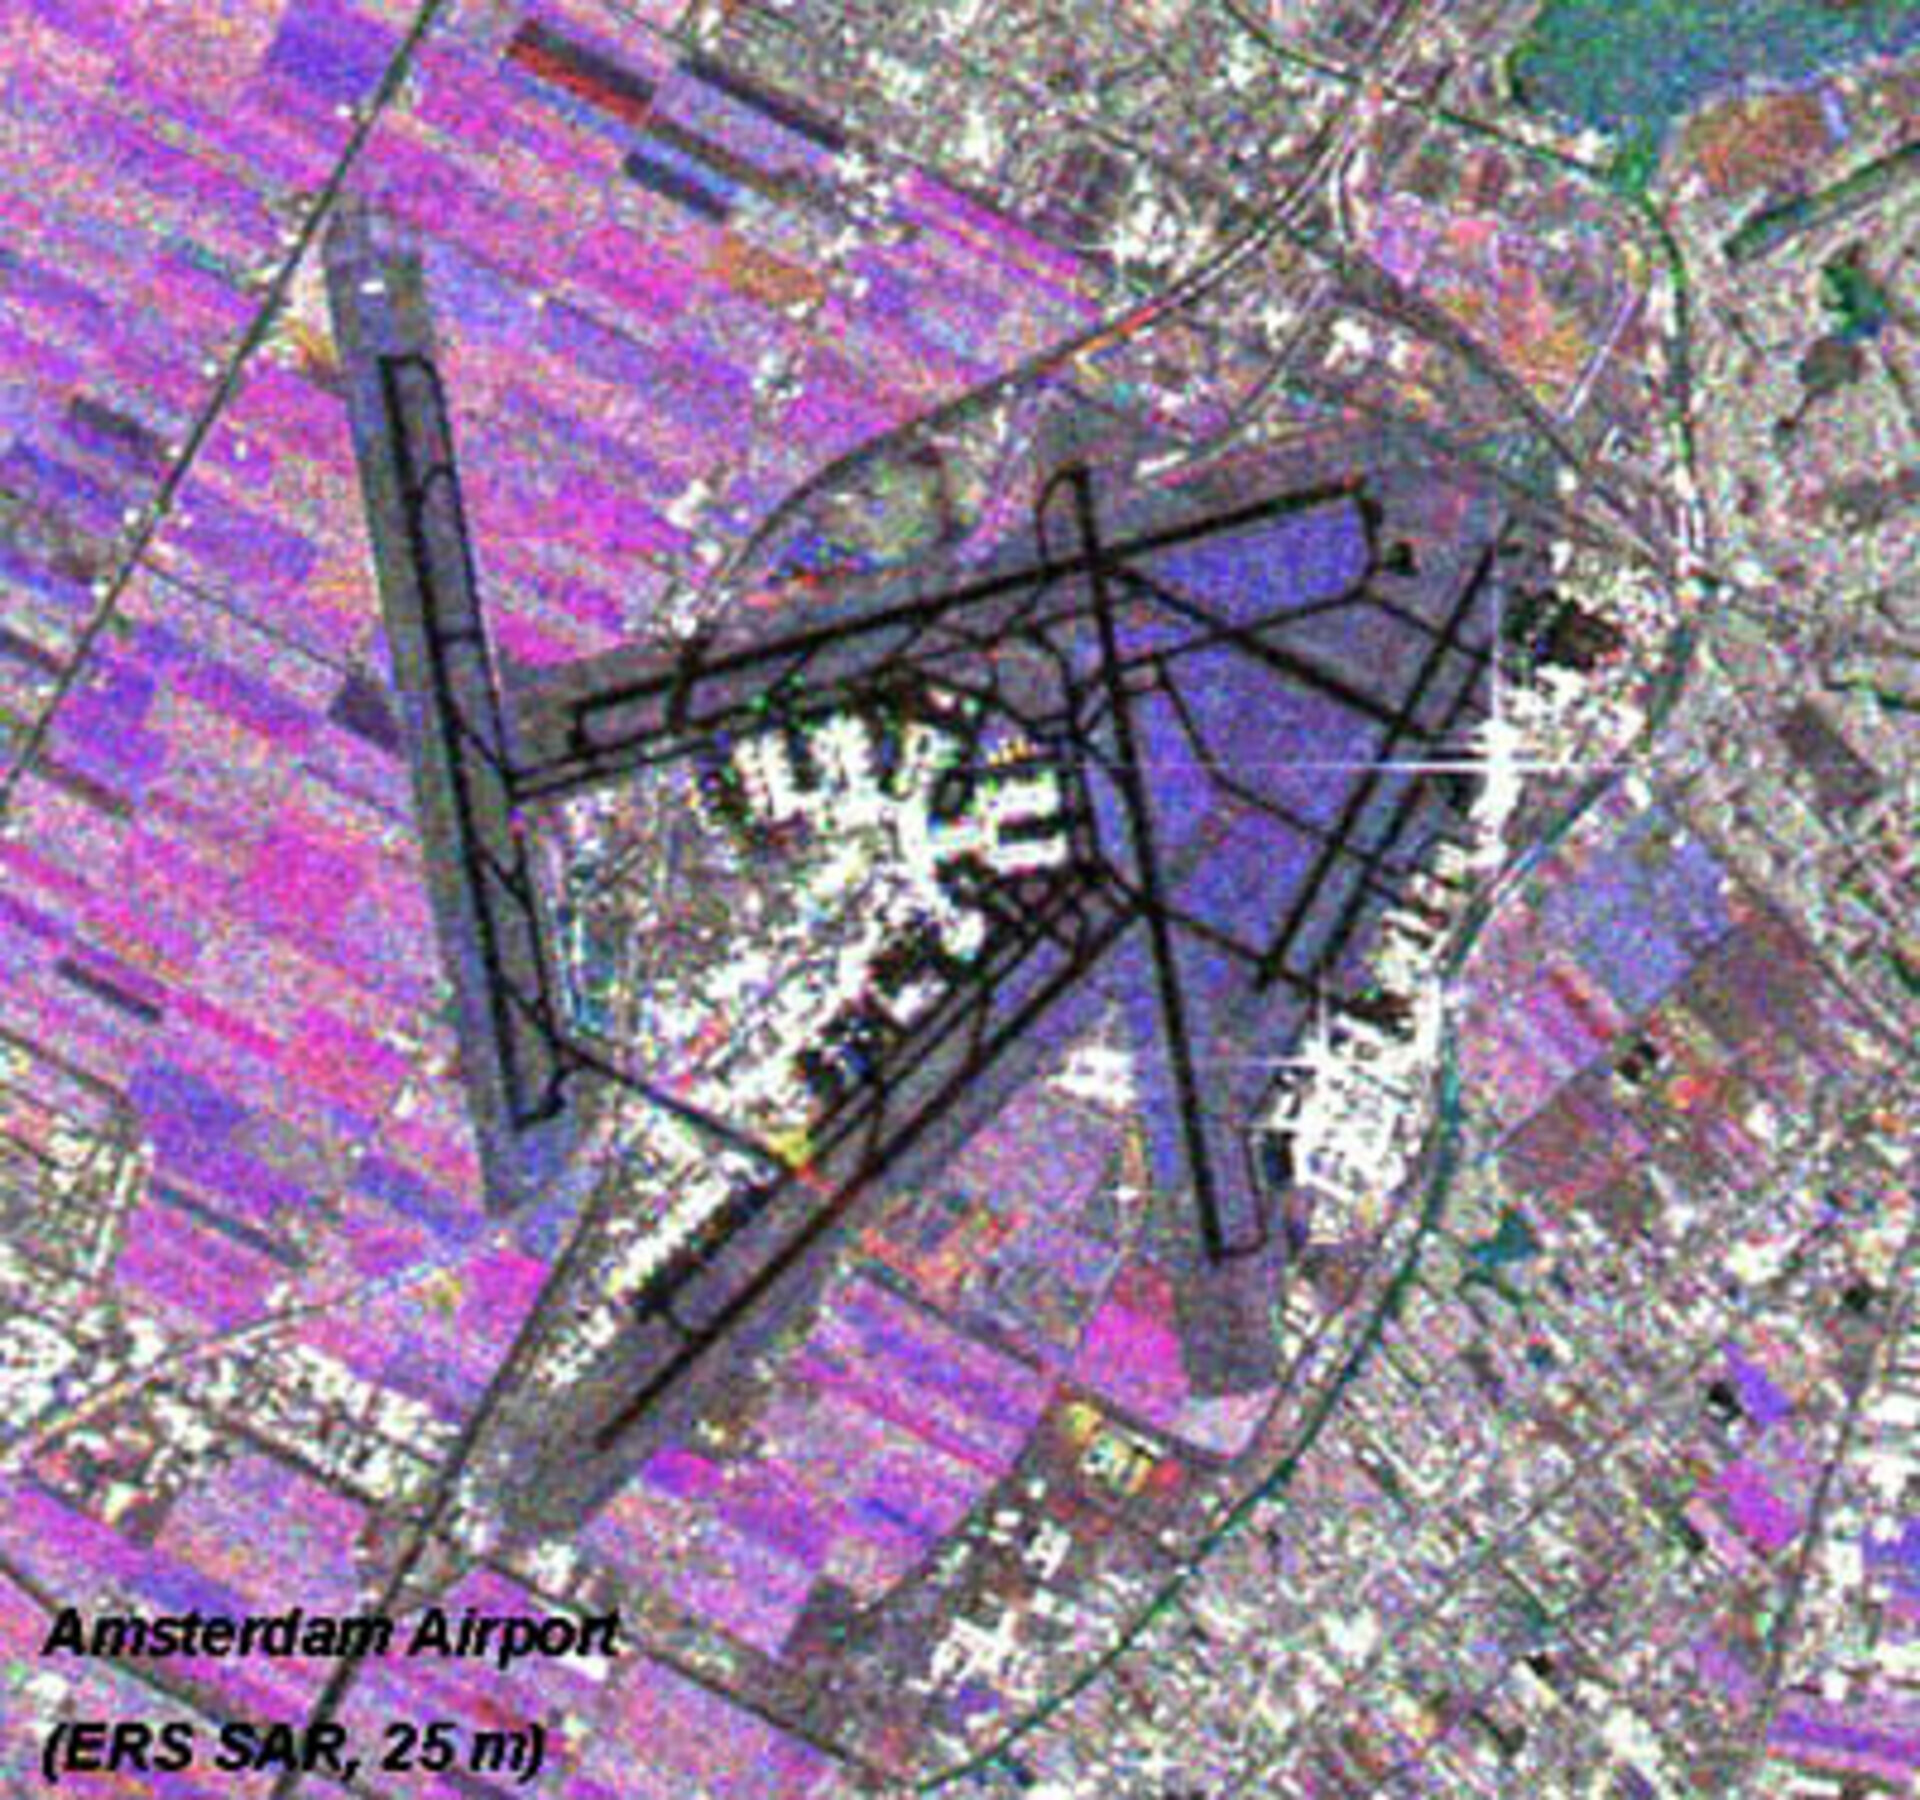 Satellite image showing agricultural fields surronding the Schipol airport